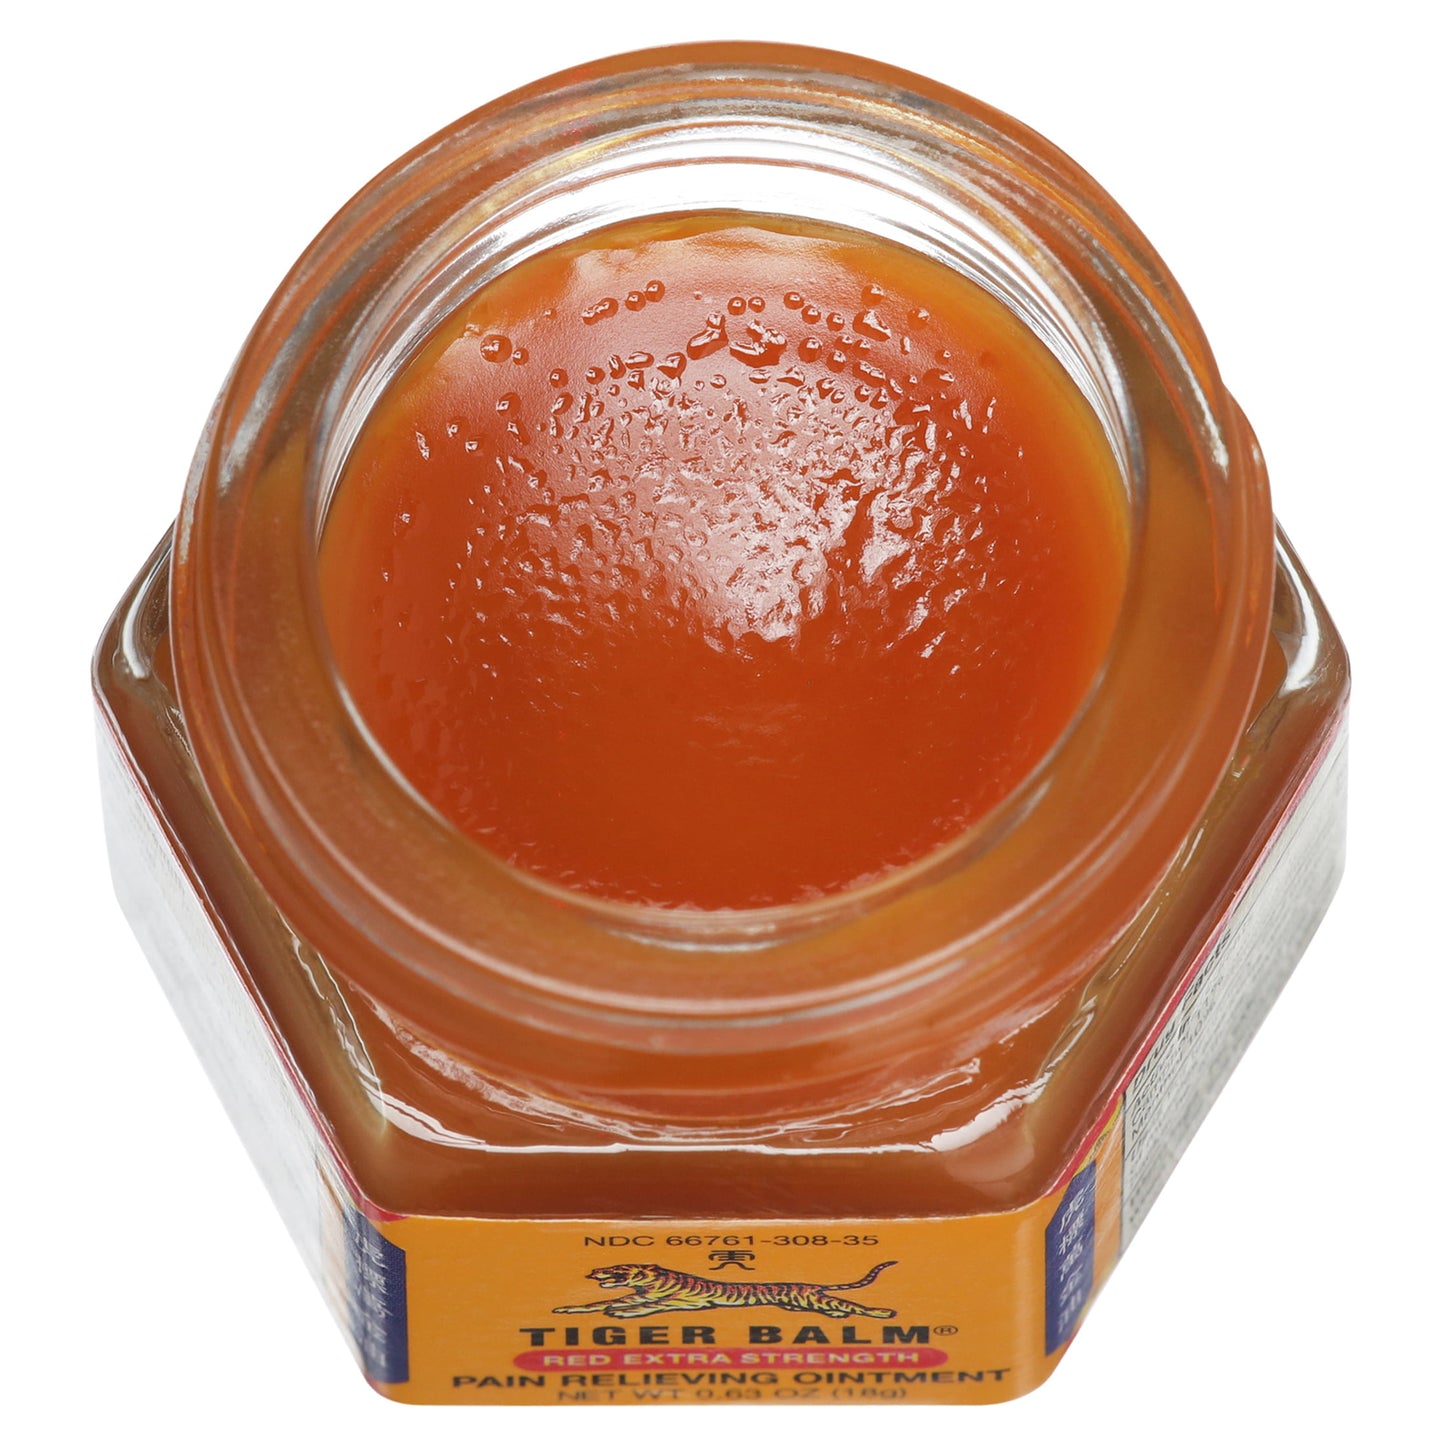 Tiger Balm Pain Relieving Ointment Red Extra Strength - DukeCityHerbs